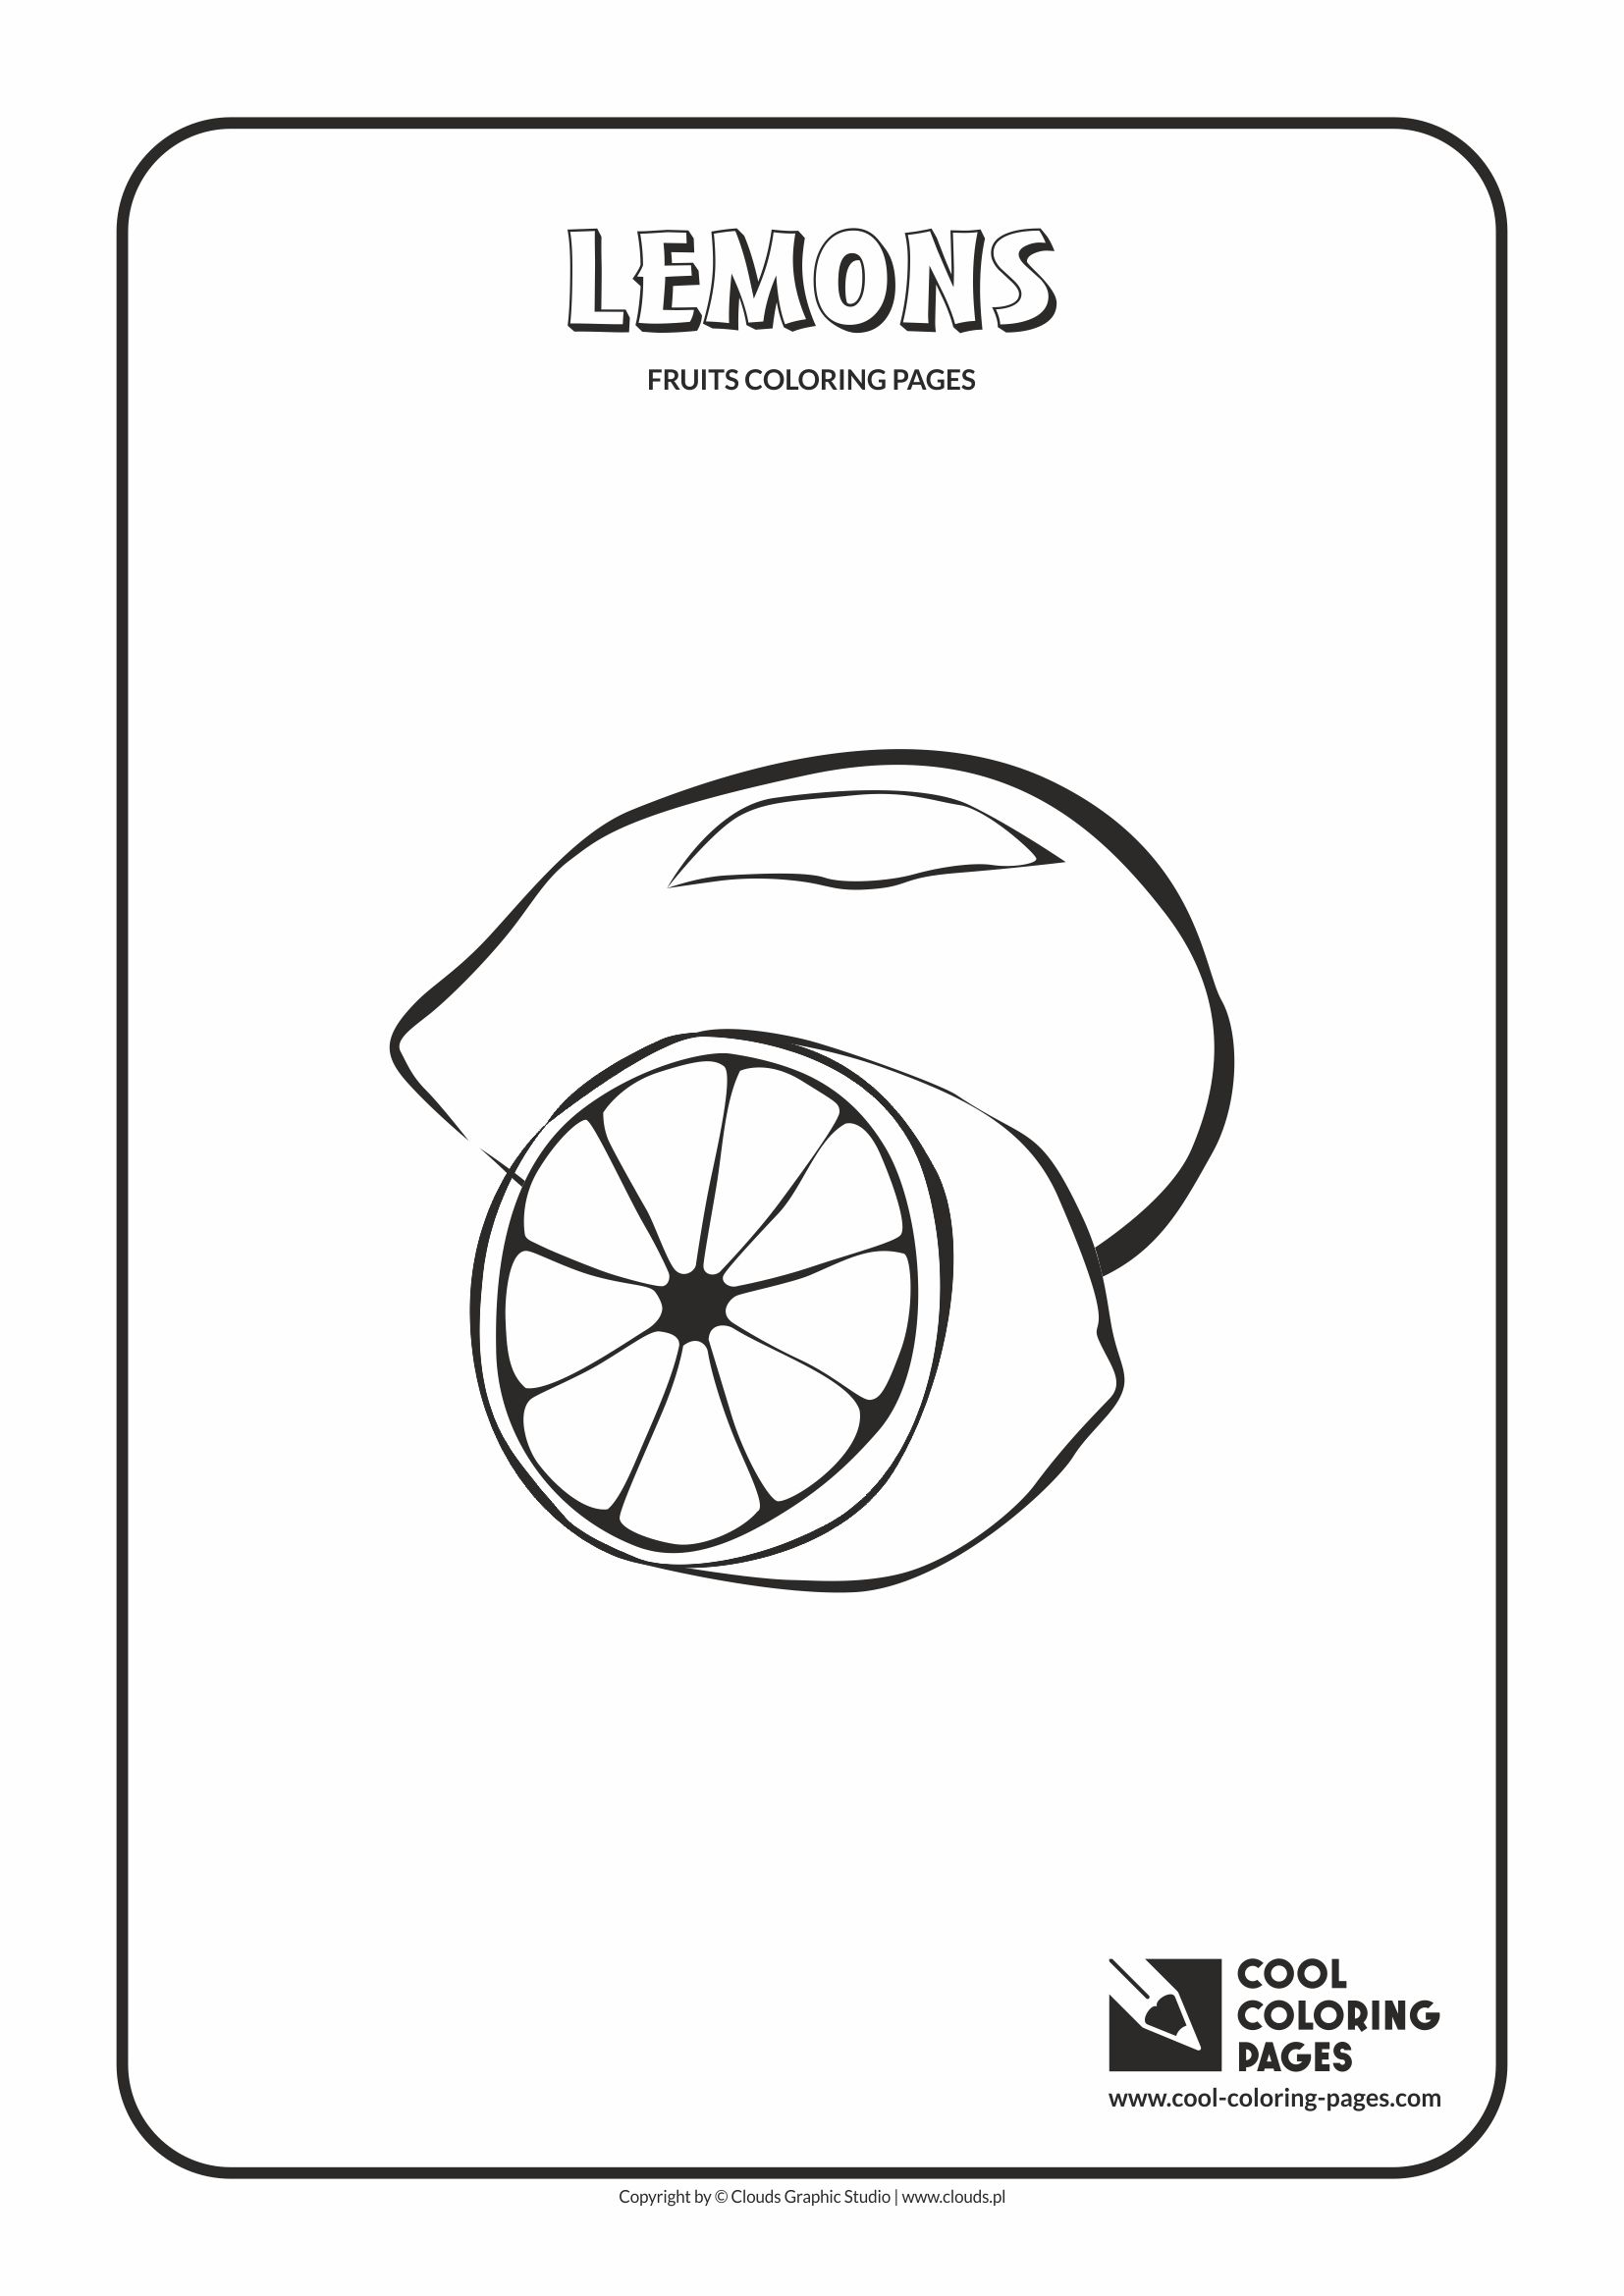 Cool Coloring Pages - Plants / Lemons / Coloring page with lemons